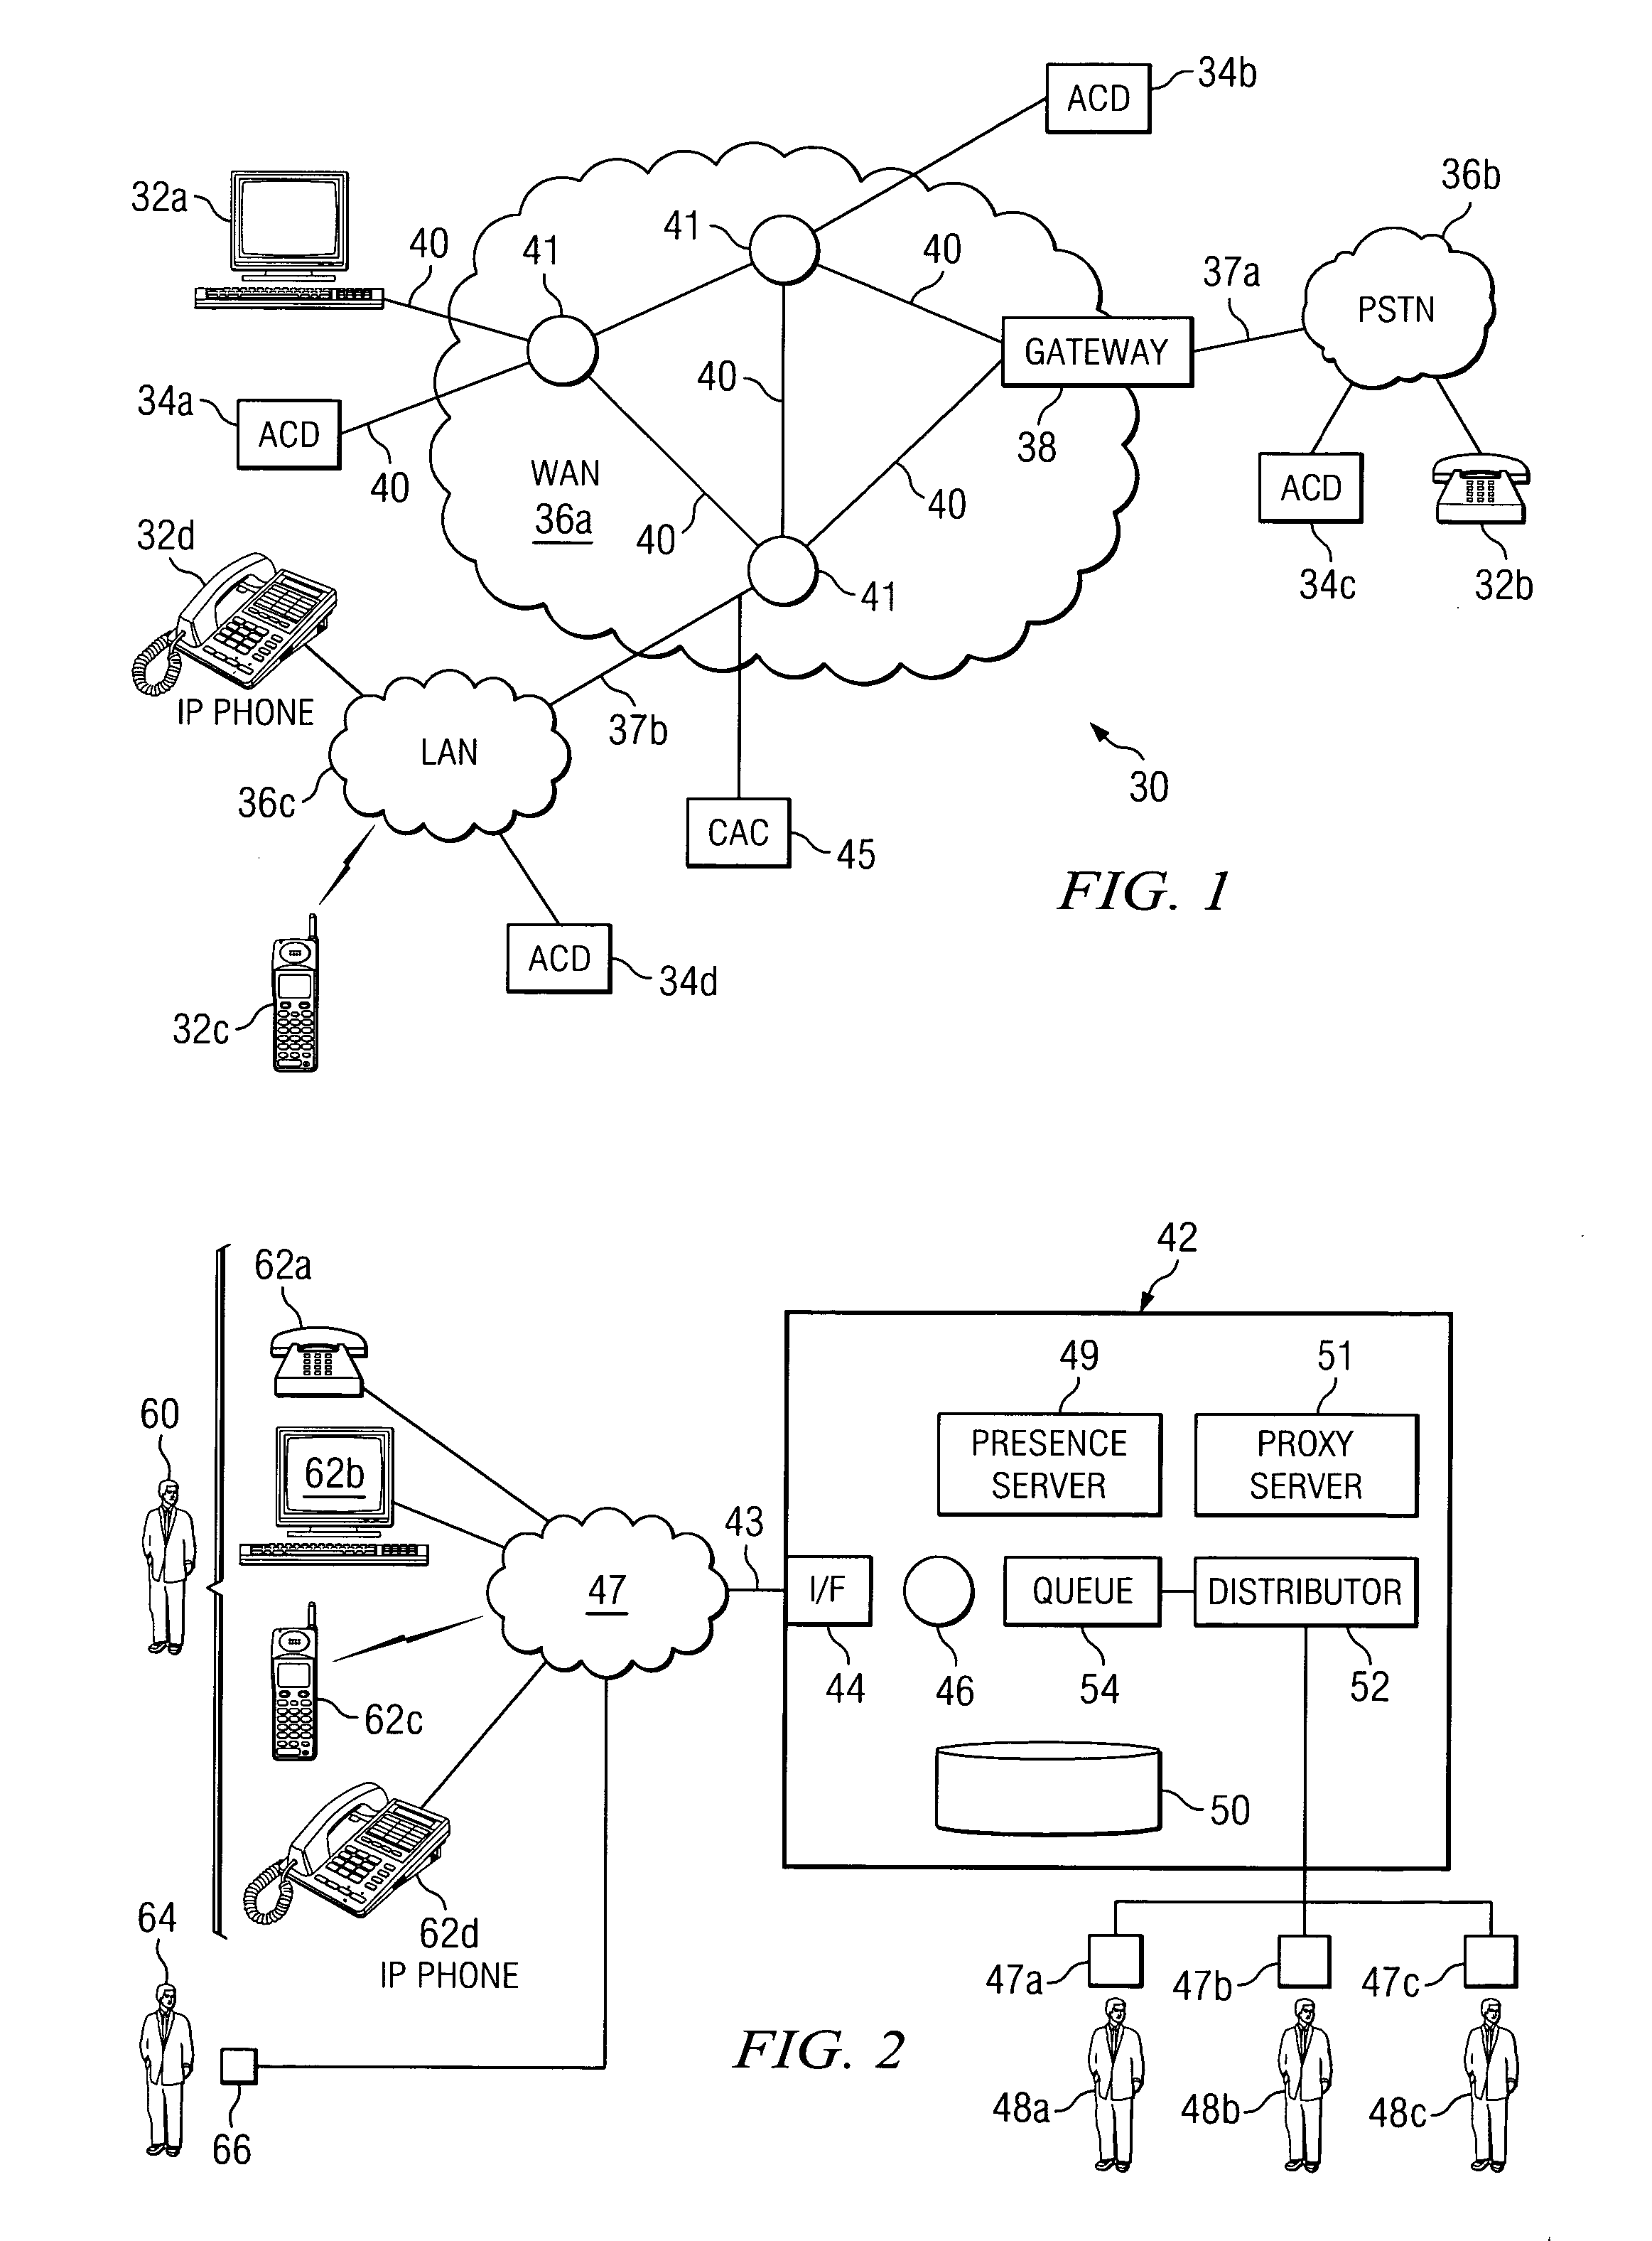 Method and system for utilizing proxy designation in a call system